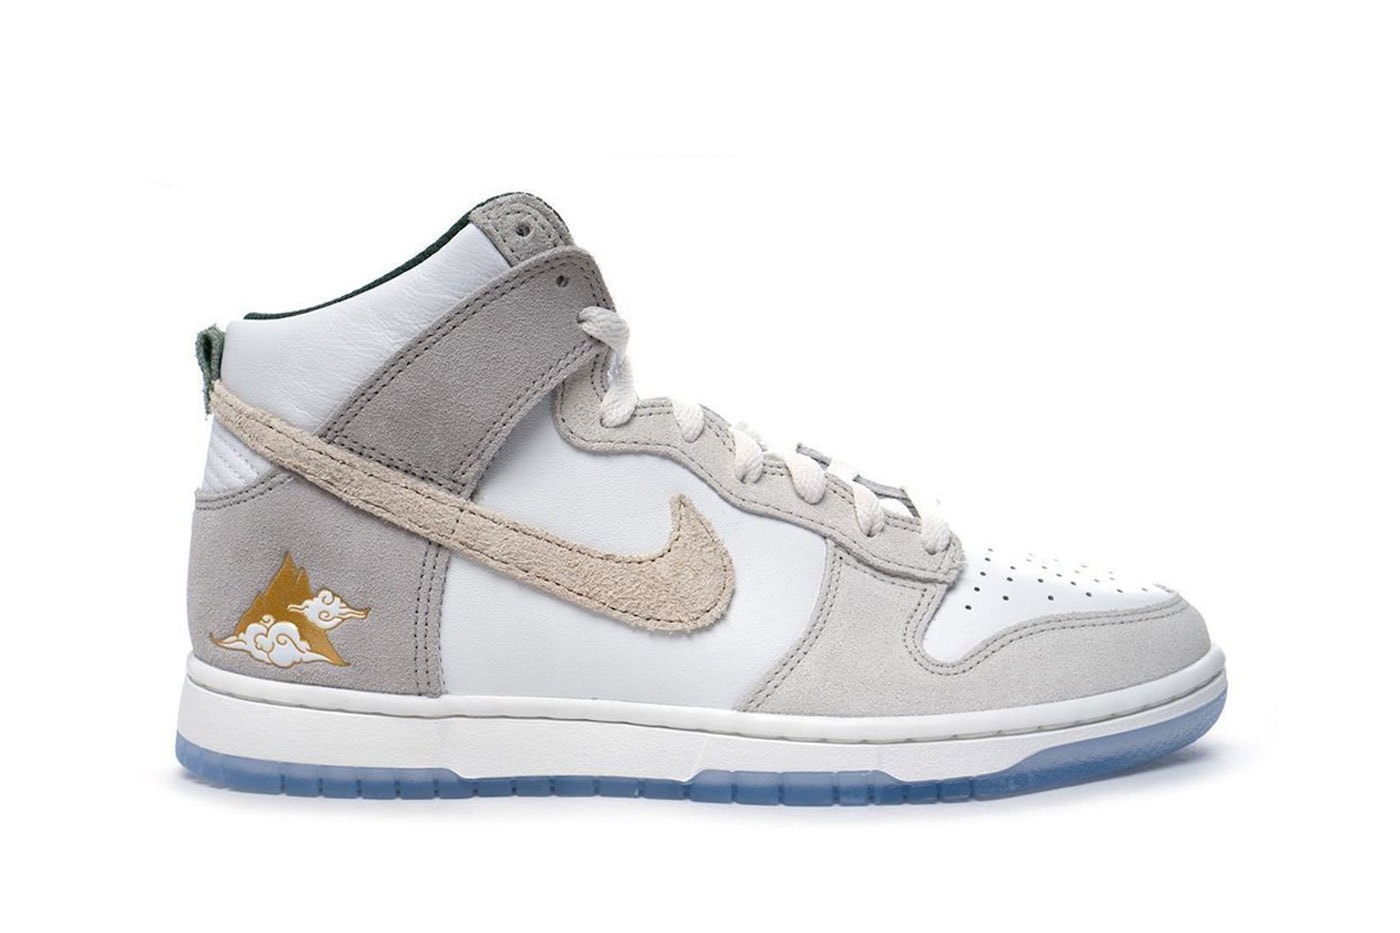 Nike Dunk High Lunar New Year Summit White Desert Ore LIght Bone Evergreen Sail Yellow Gold January 1 FD0776 100 135 usd fengshui mountain cloud chinese characer gold mountain release info date price